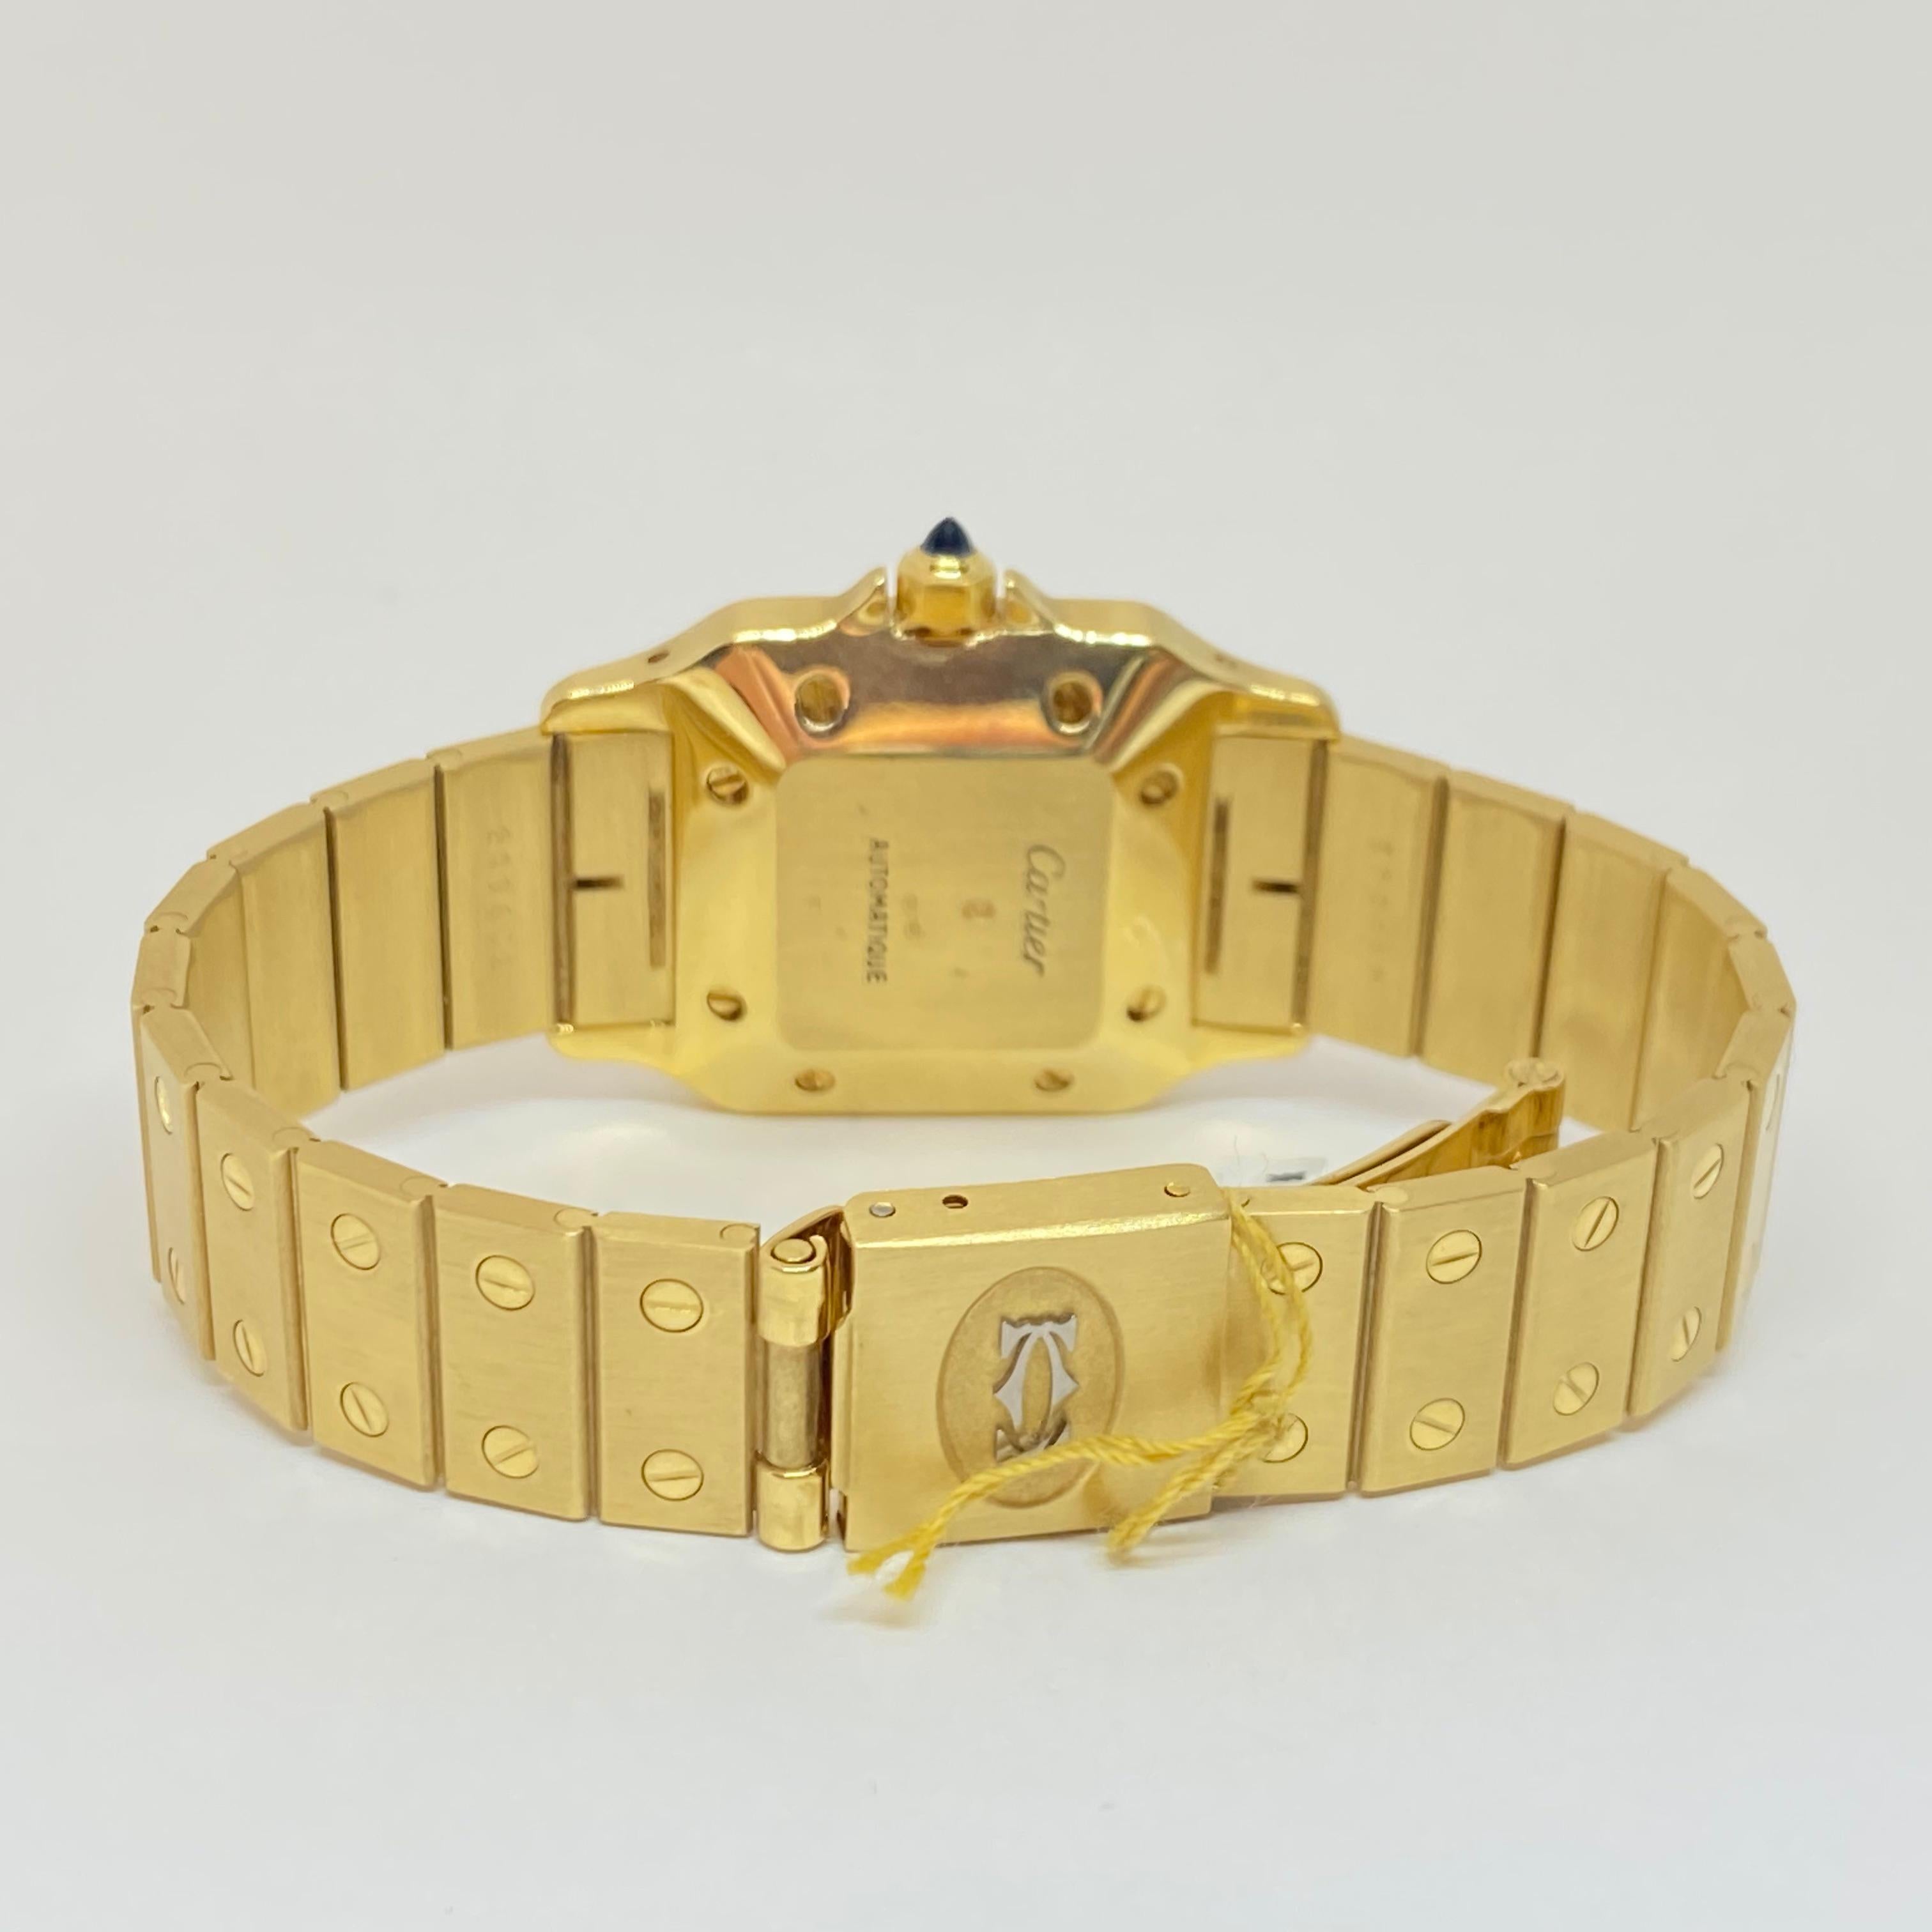 Pre-owned Cartier Santos Automatic timepiece designed in solid 18 karat yellow gold. The case measures 27 x 39mm, automatic movement, gold link bracelet, single deployant fold over clasp, blue steel hands, second hand, date window, blue crown. One